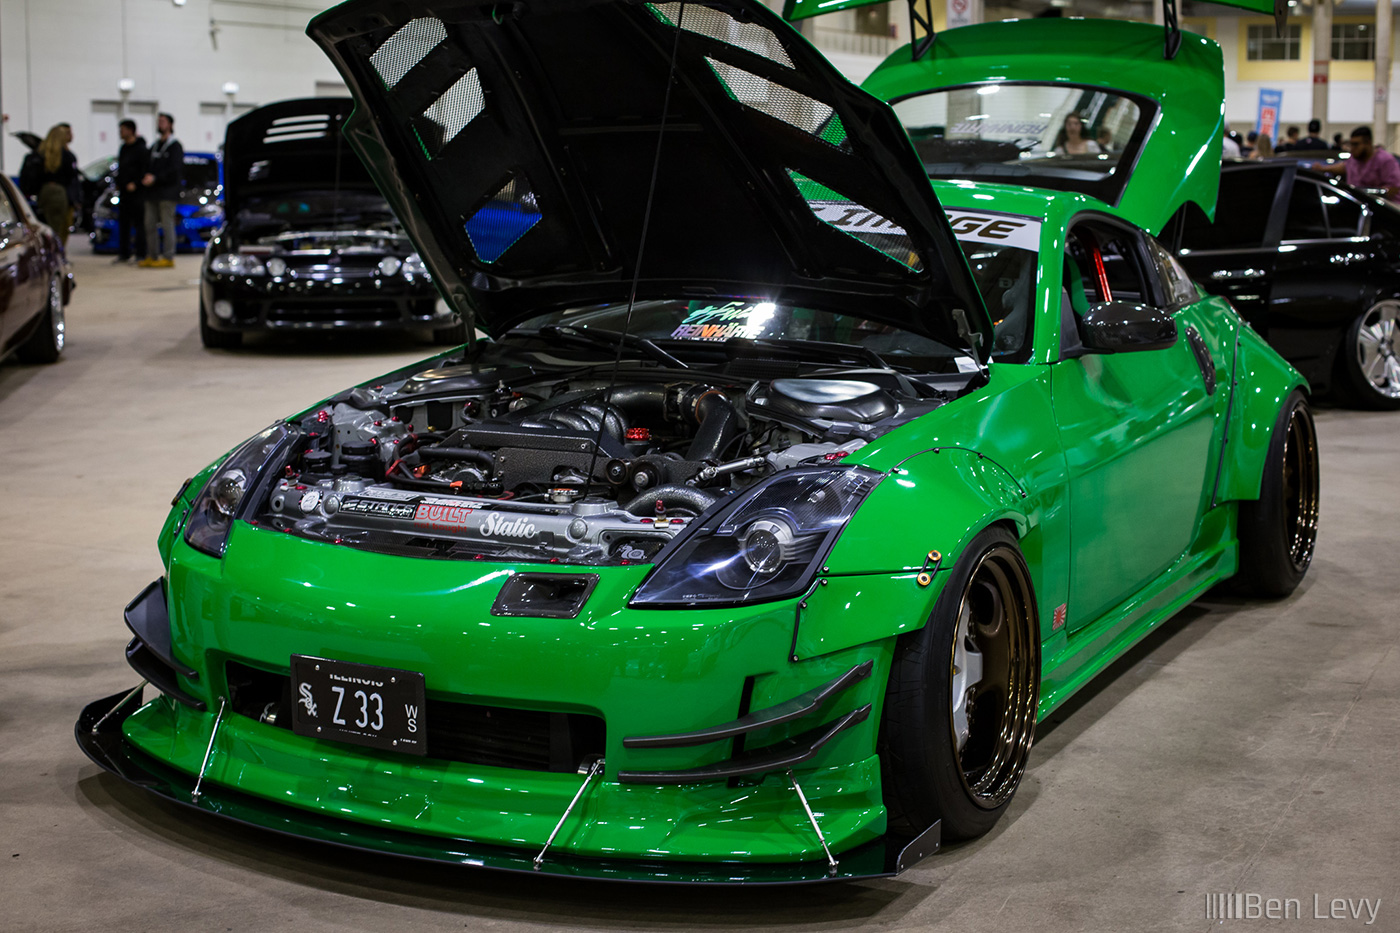 Green Nissan 350Z from Perfect Image Auto